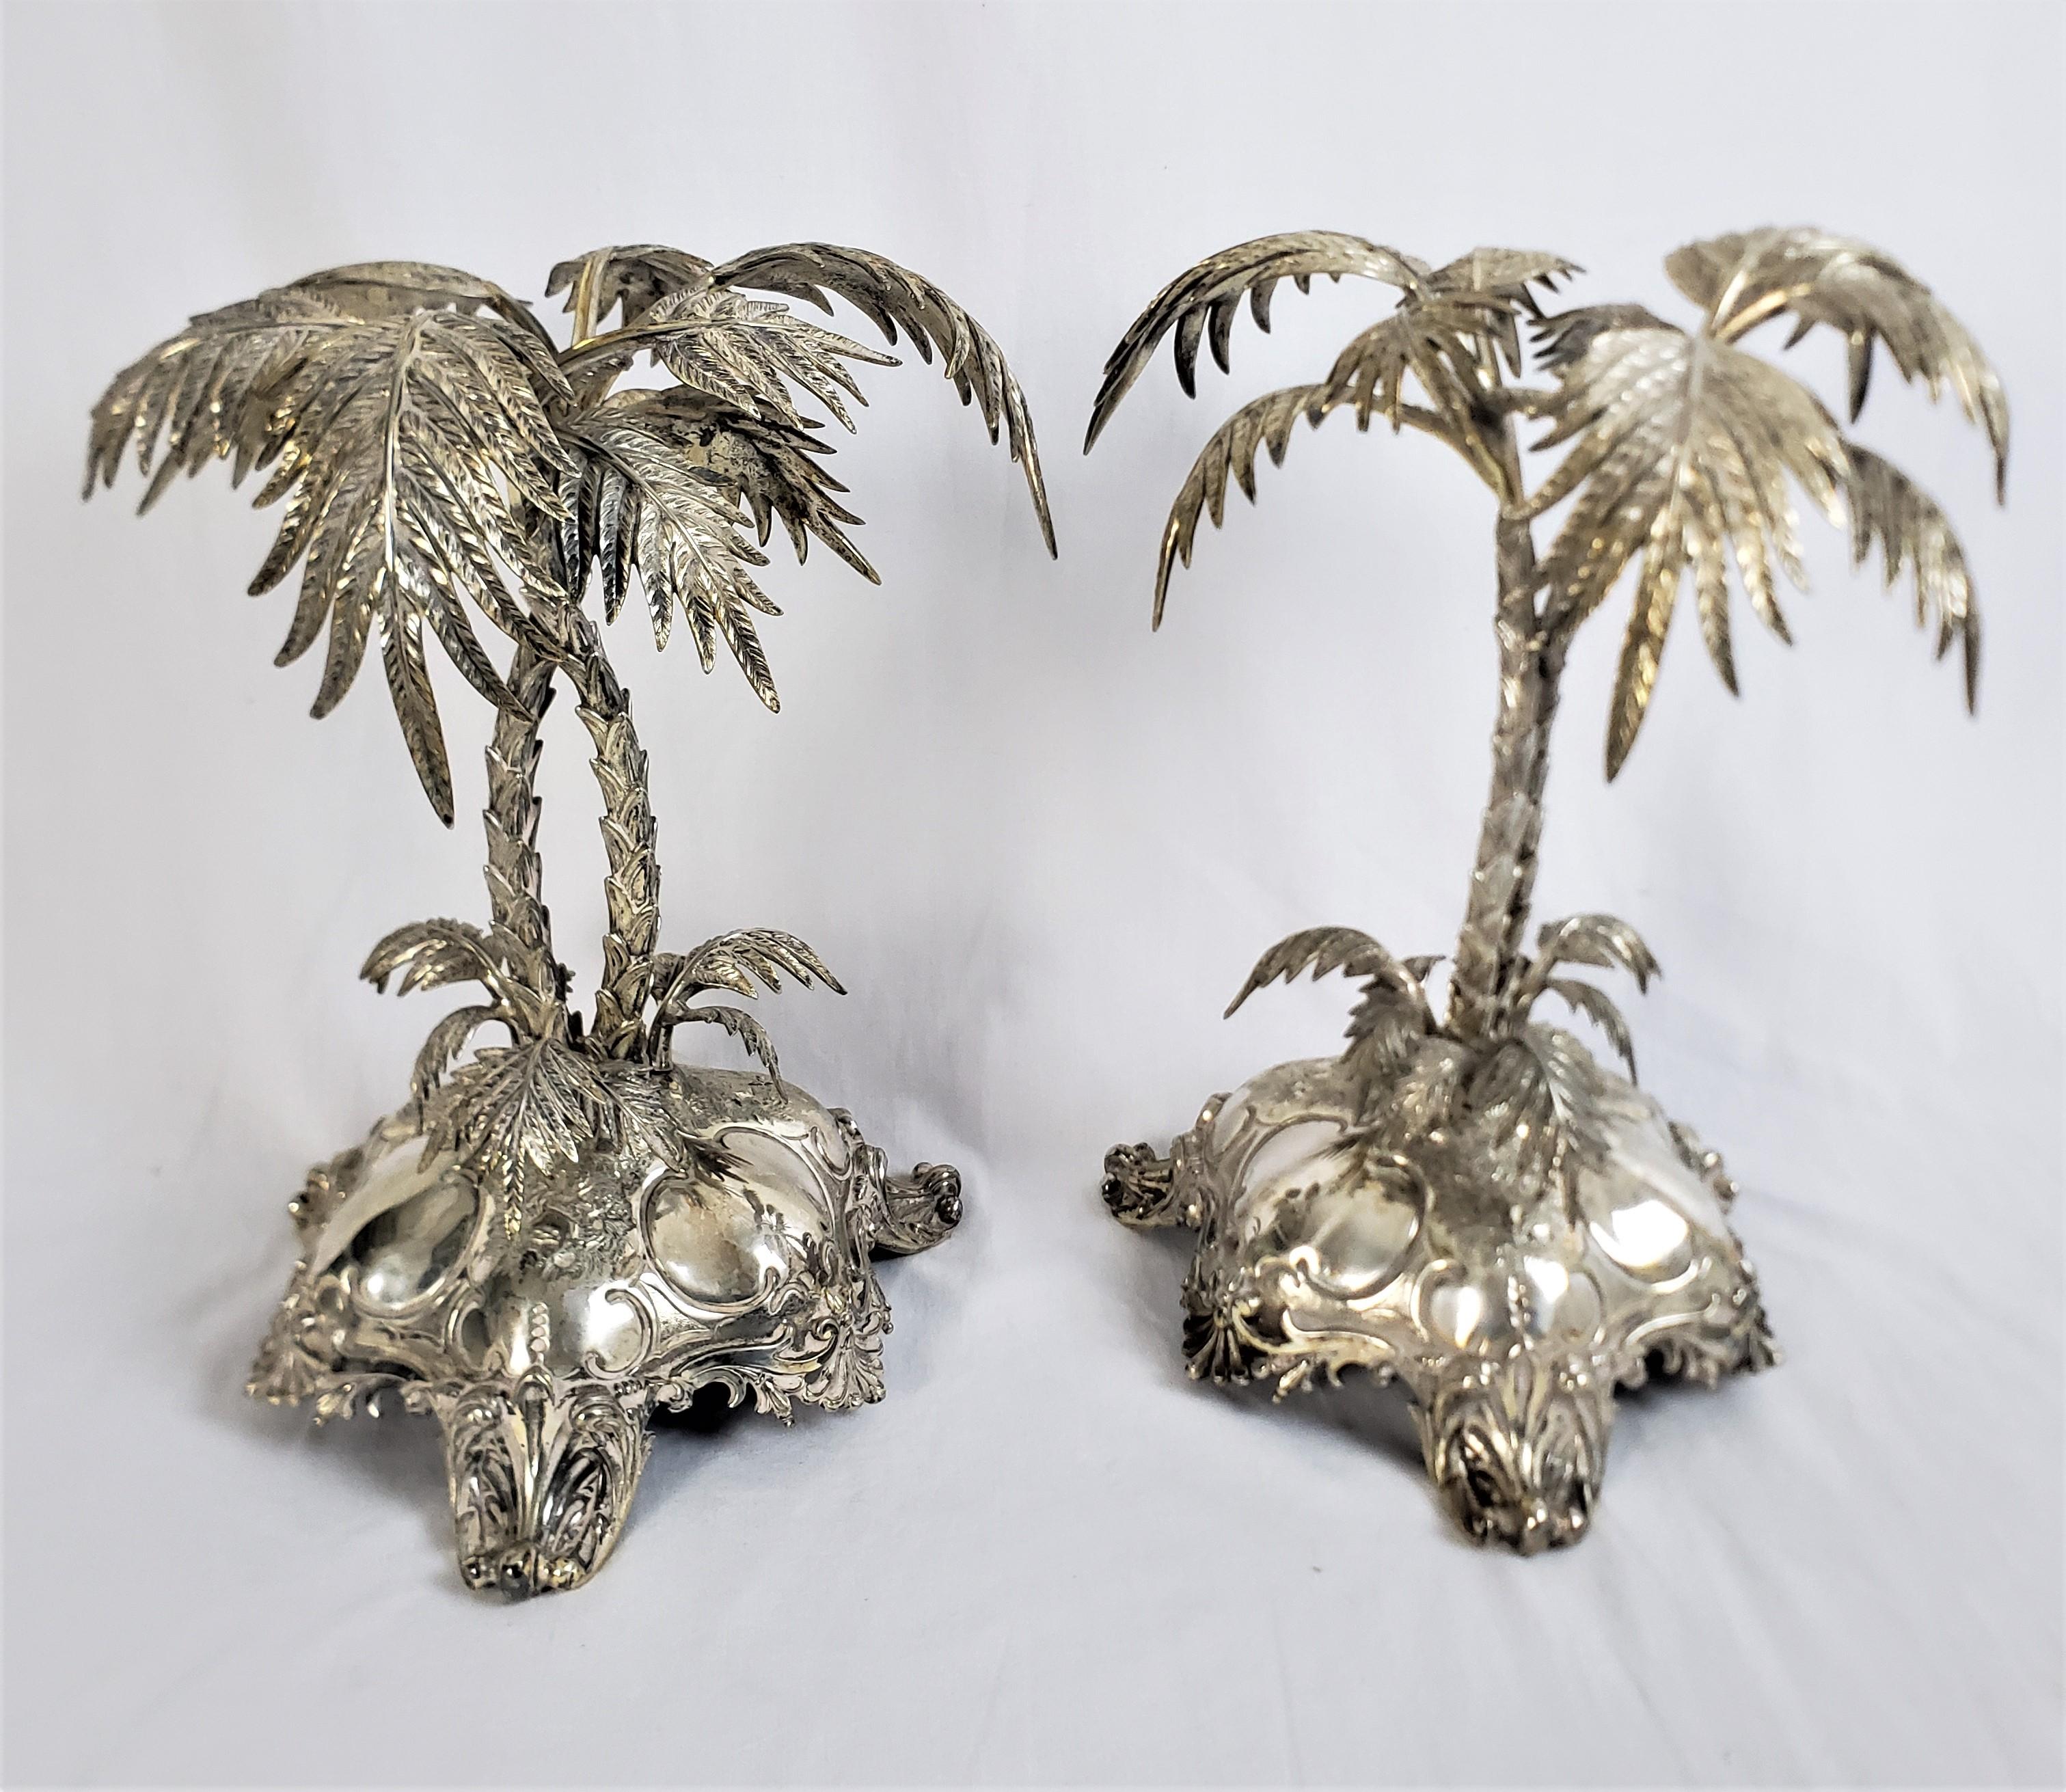 Huge Antique Silver Plated Anglo-Indian Styled Figural Palm Tree Centerpiece Set For Sale 10